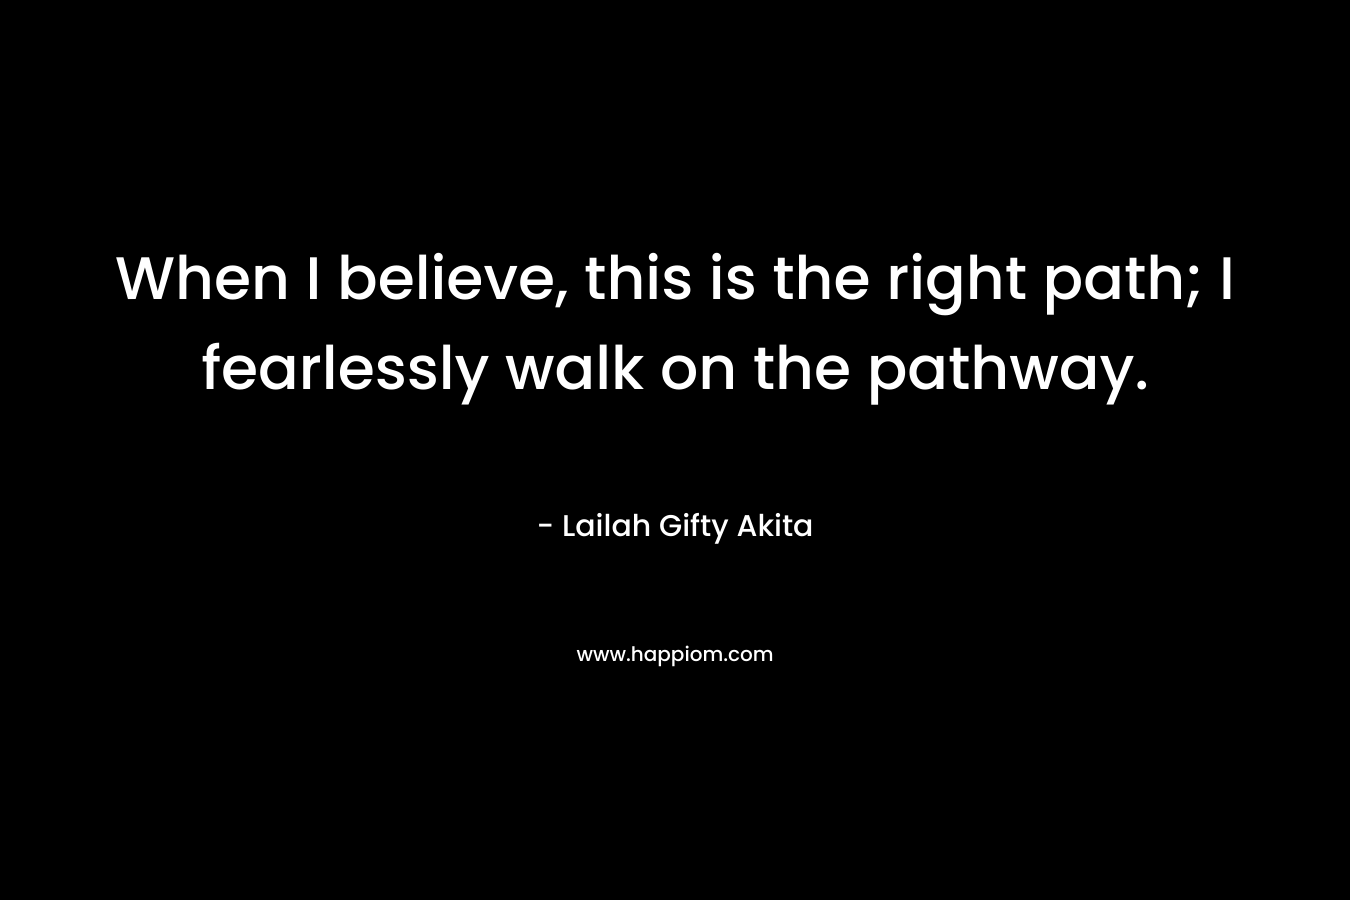 When I believe, this is the right path; I fearlessly walk on the pathway. – Lailah Gifty Akita